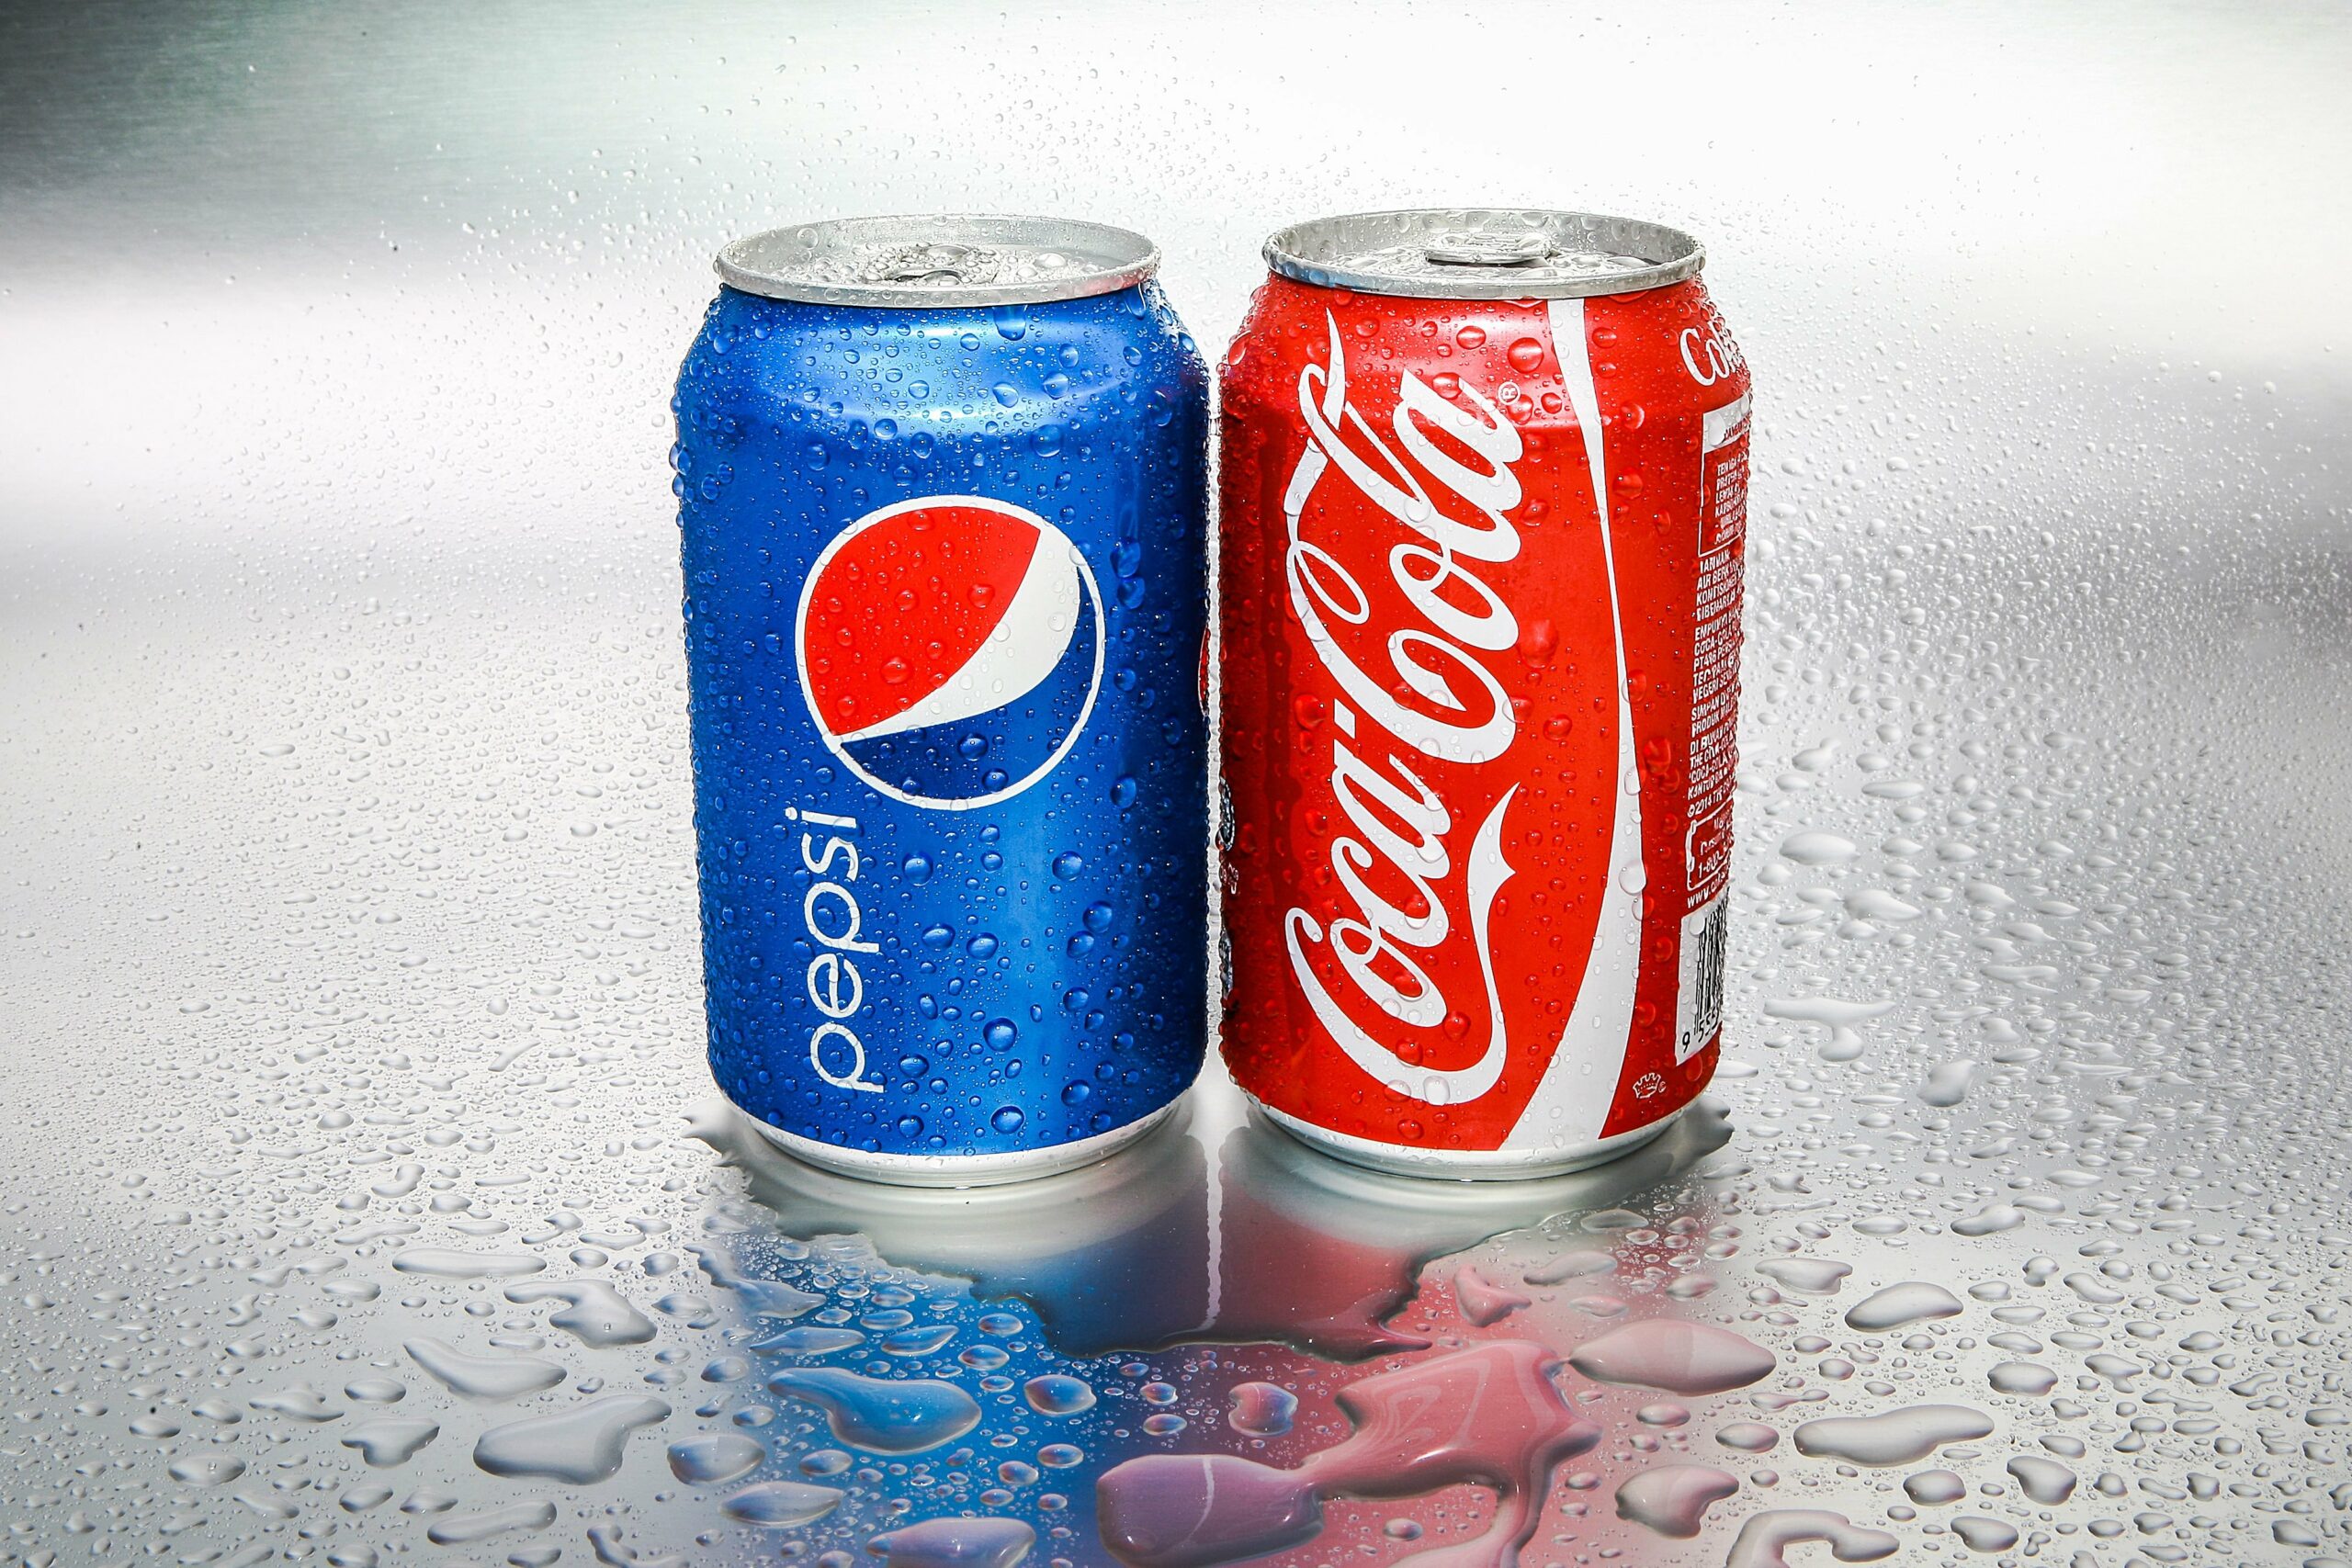 Coca-Cola, Pepsi will not be advertising their namesake sodas during the Super Bowl